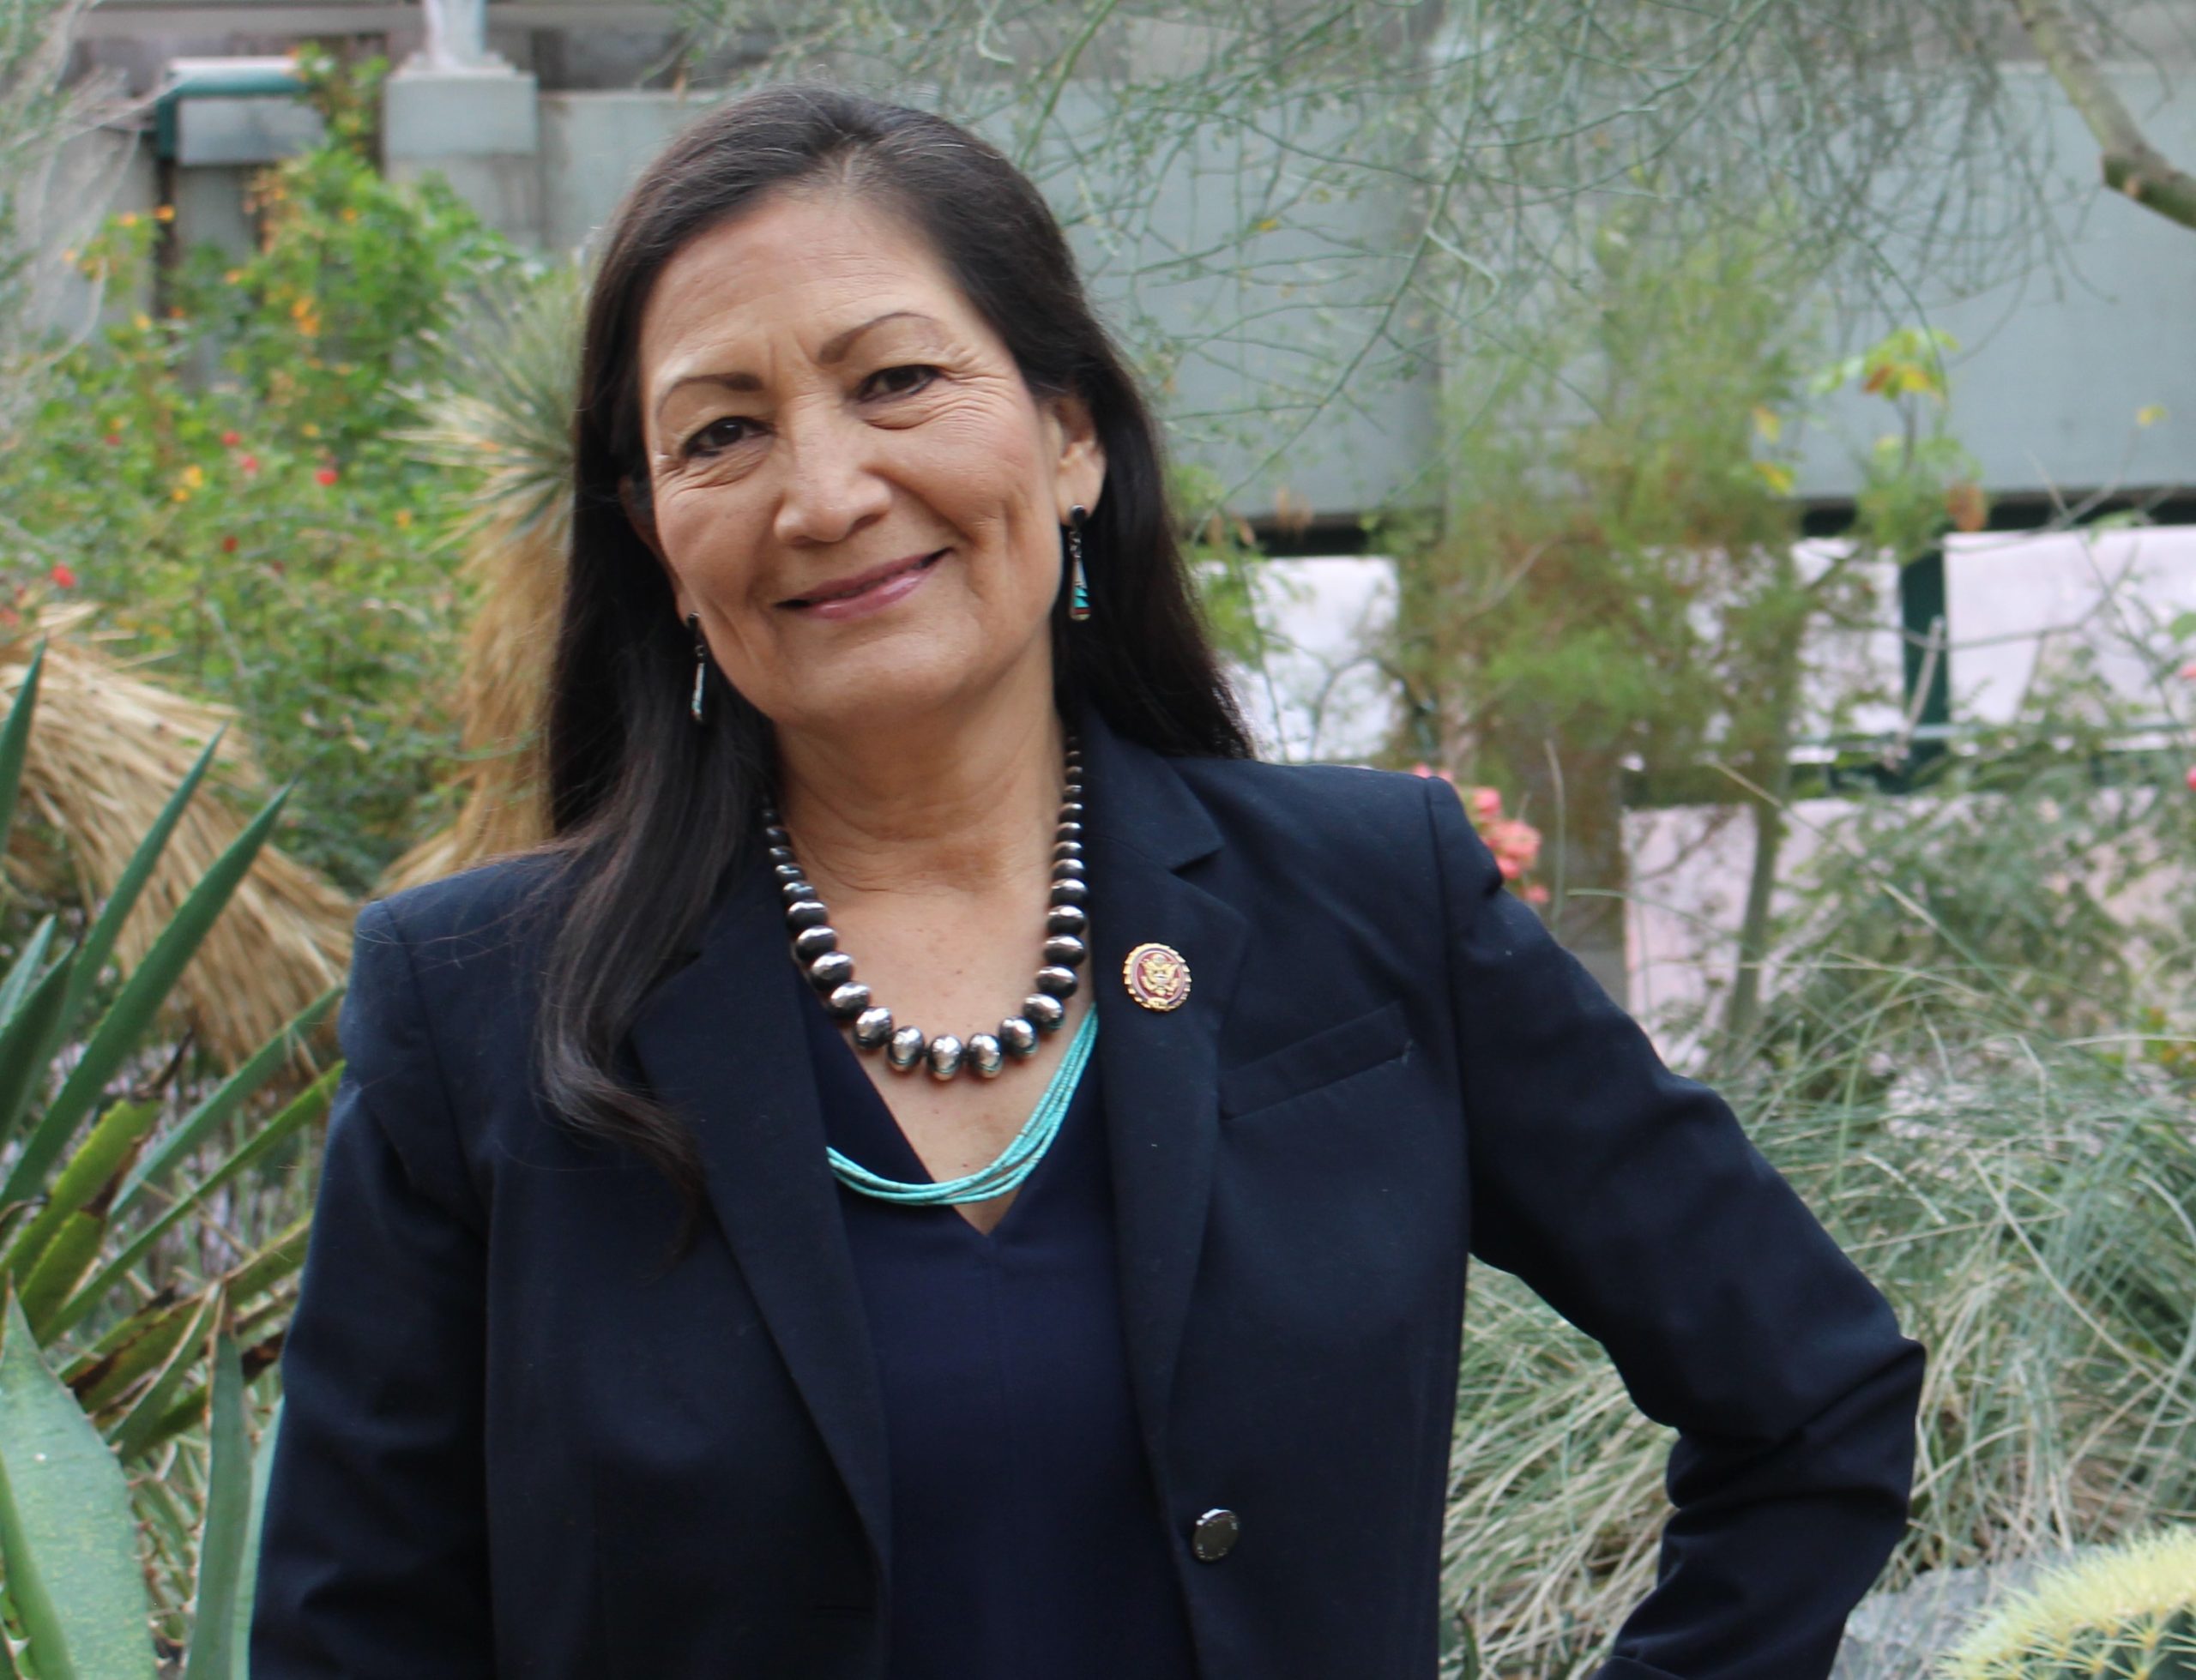 Haaland asks for House to start impeachment inquiry